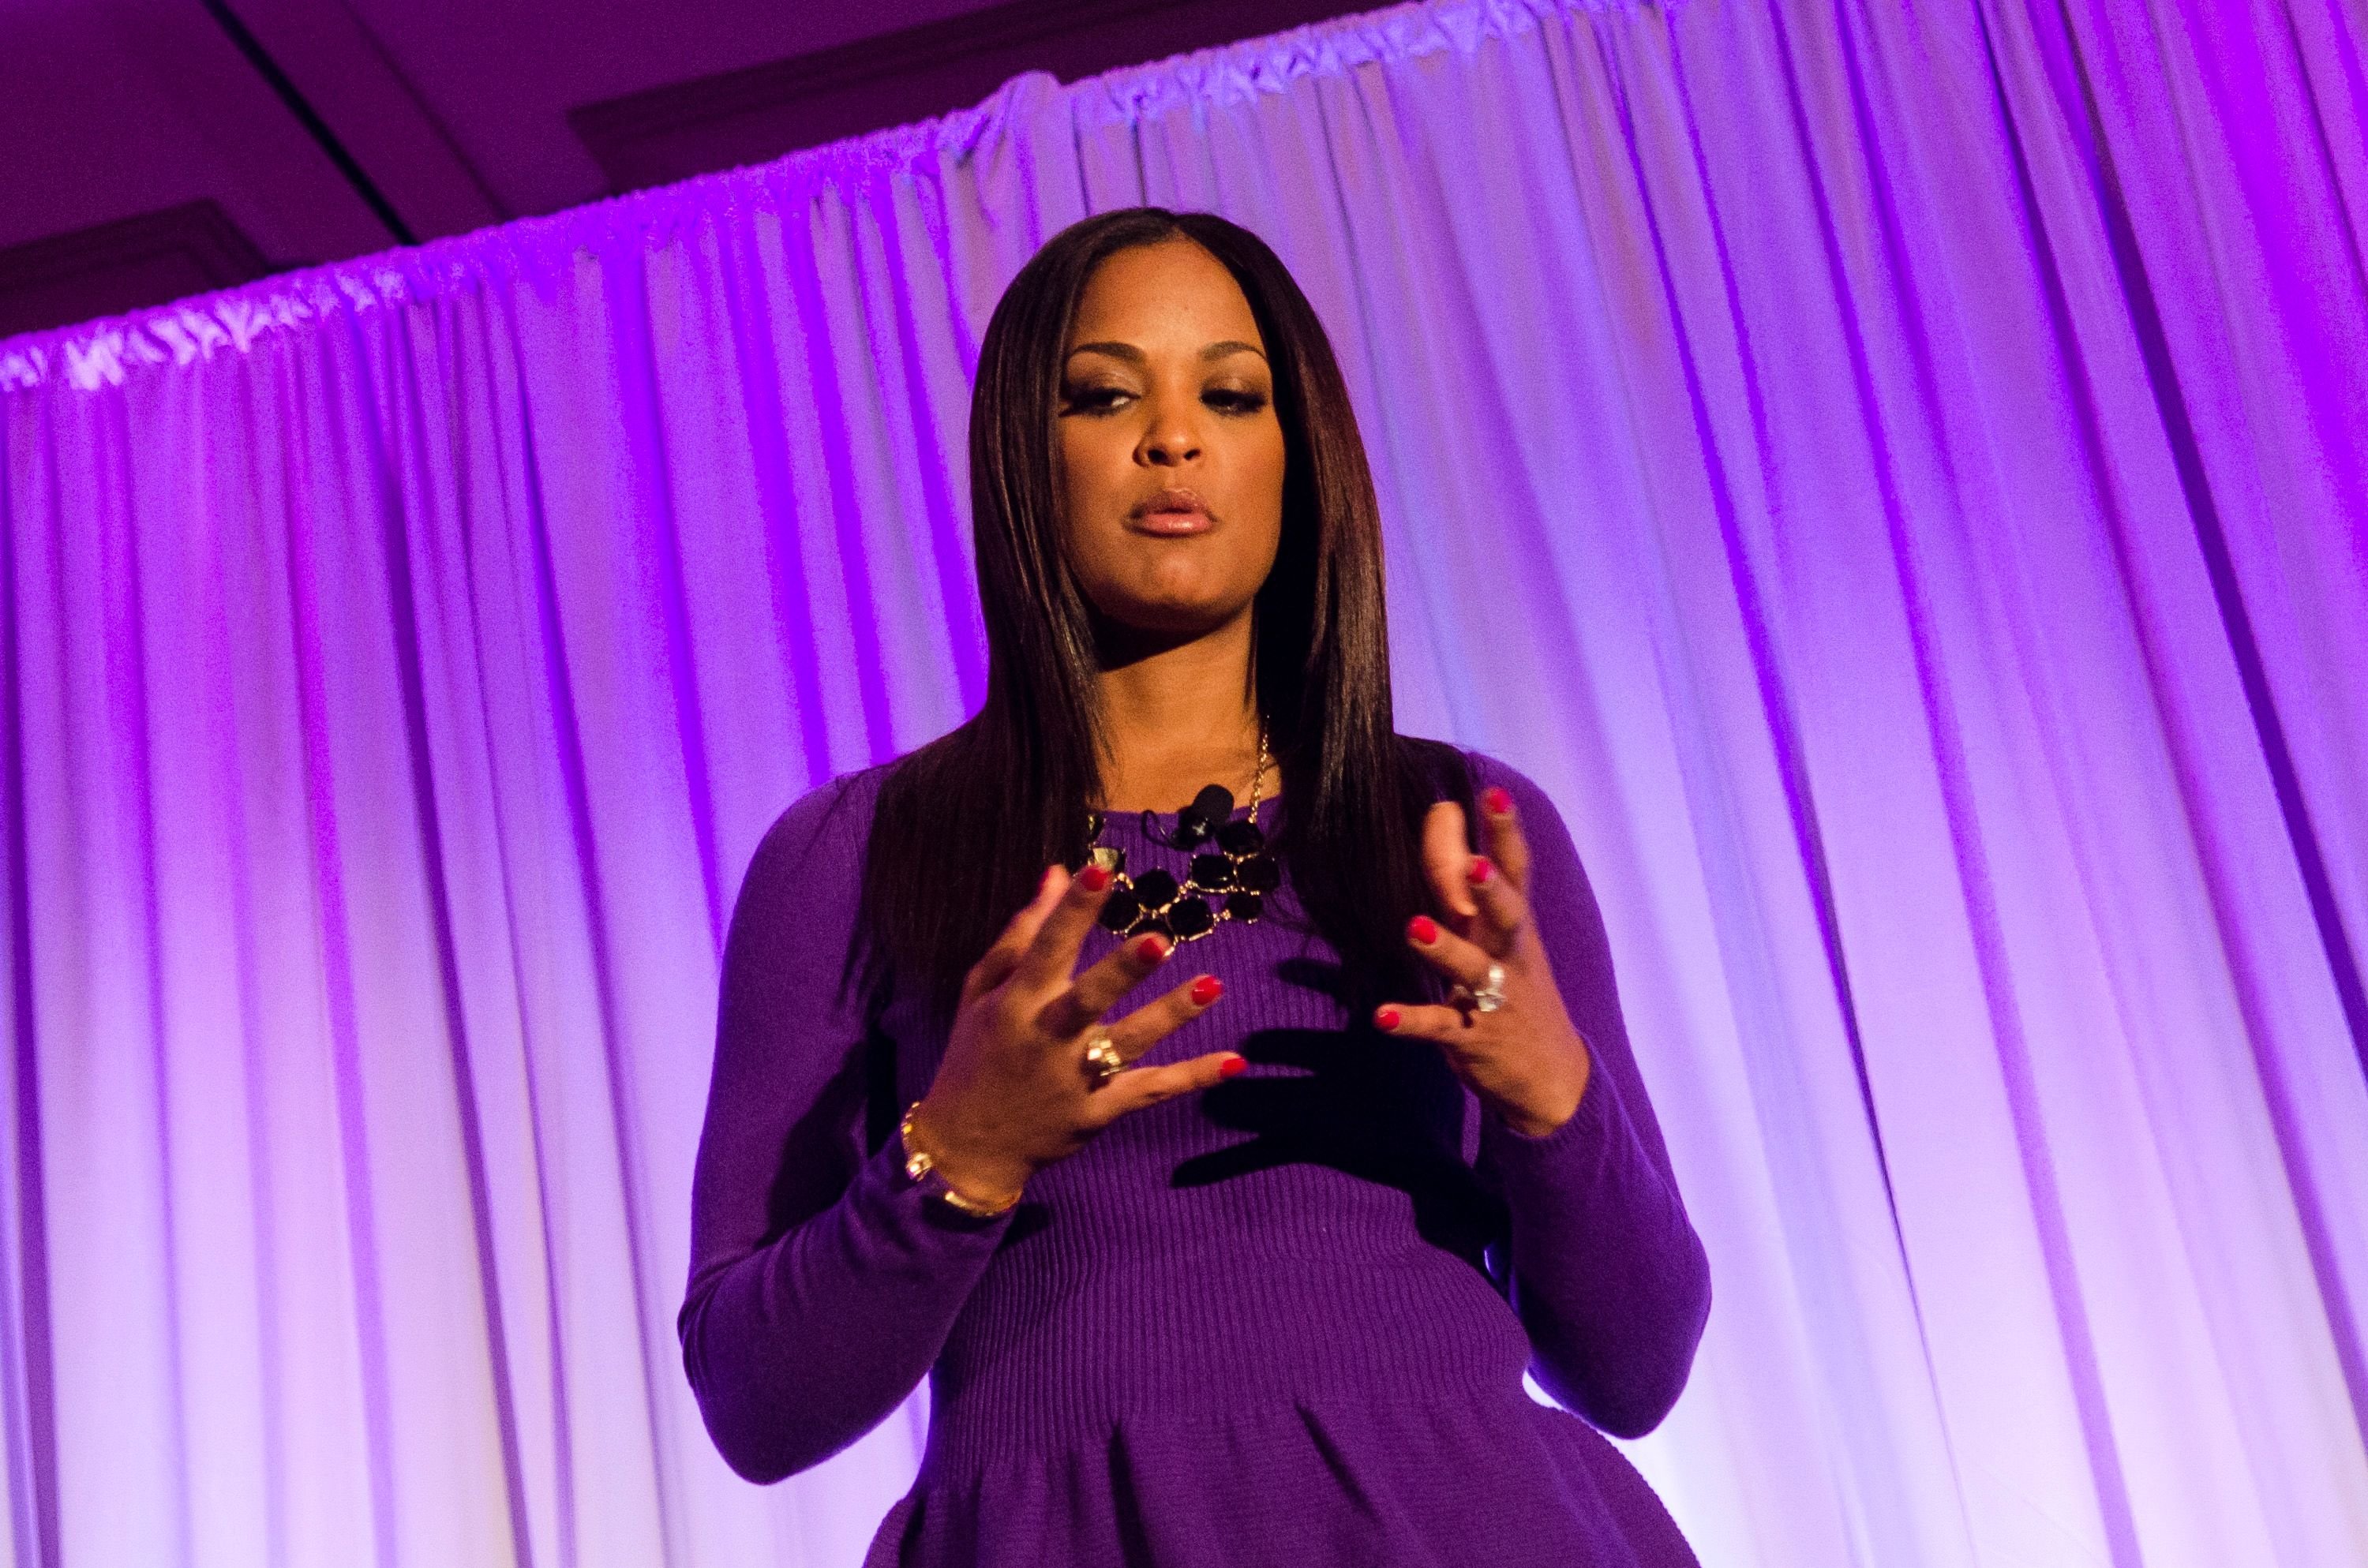 Laila Ali at the 6th annual Get RADICAL Women's Conference at the Hyatt Regency on March 21, 2014 | Photo: Getty Images